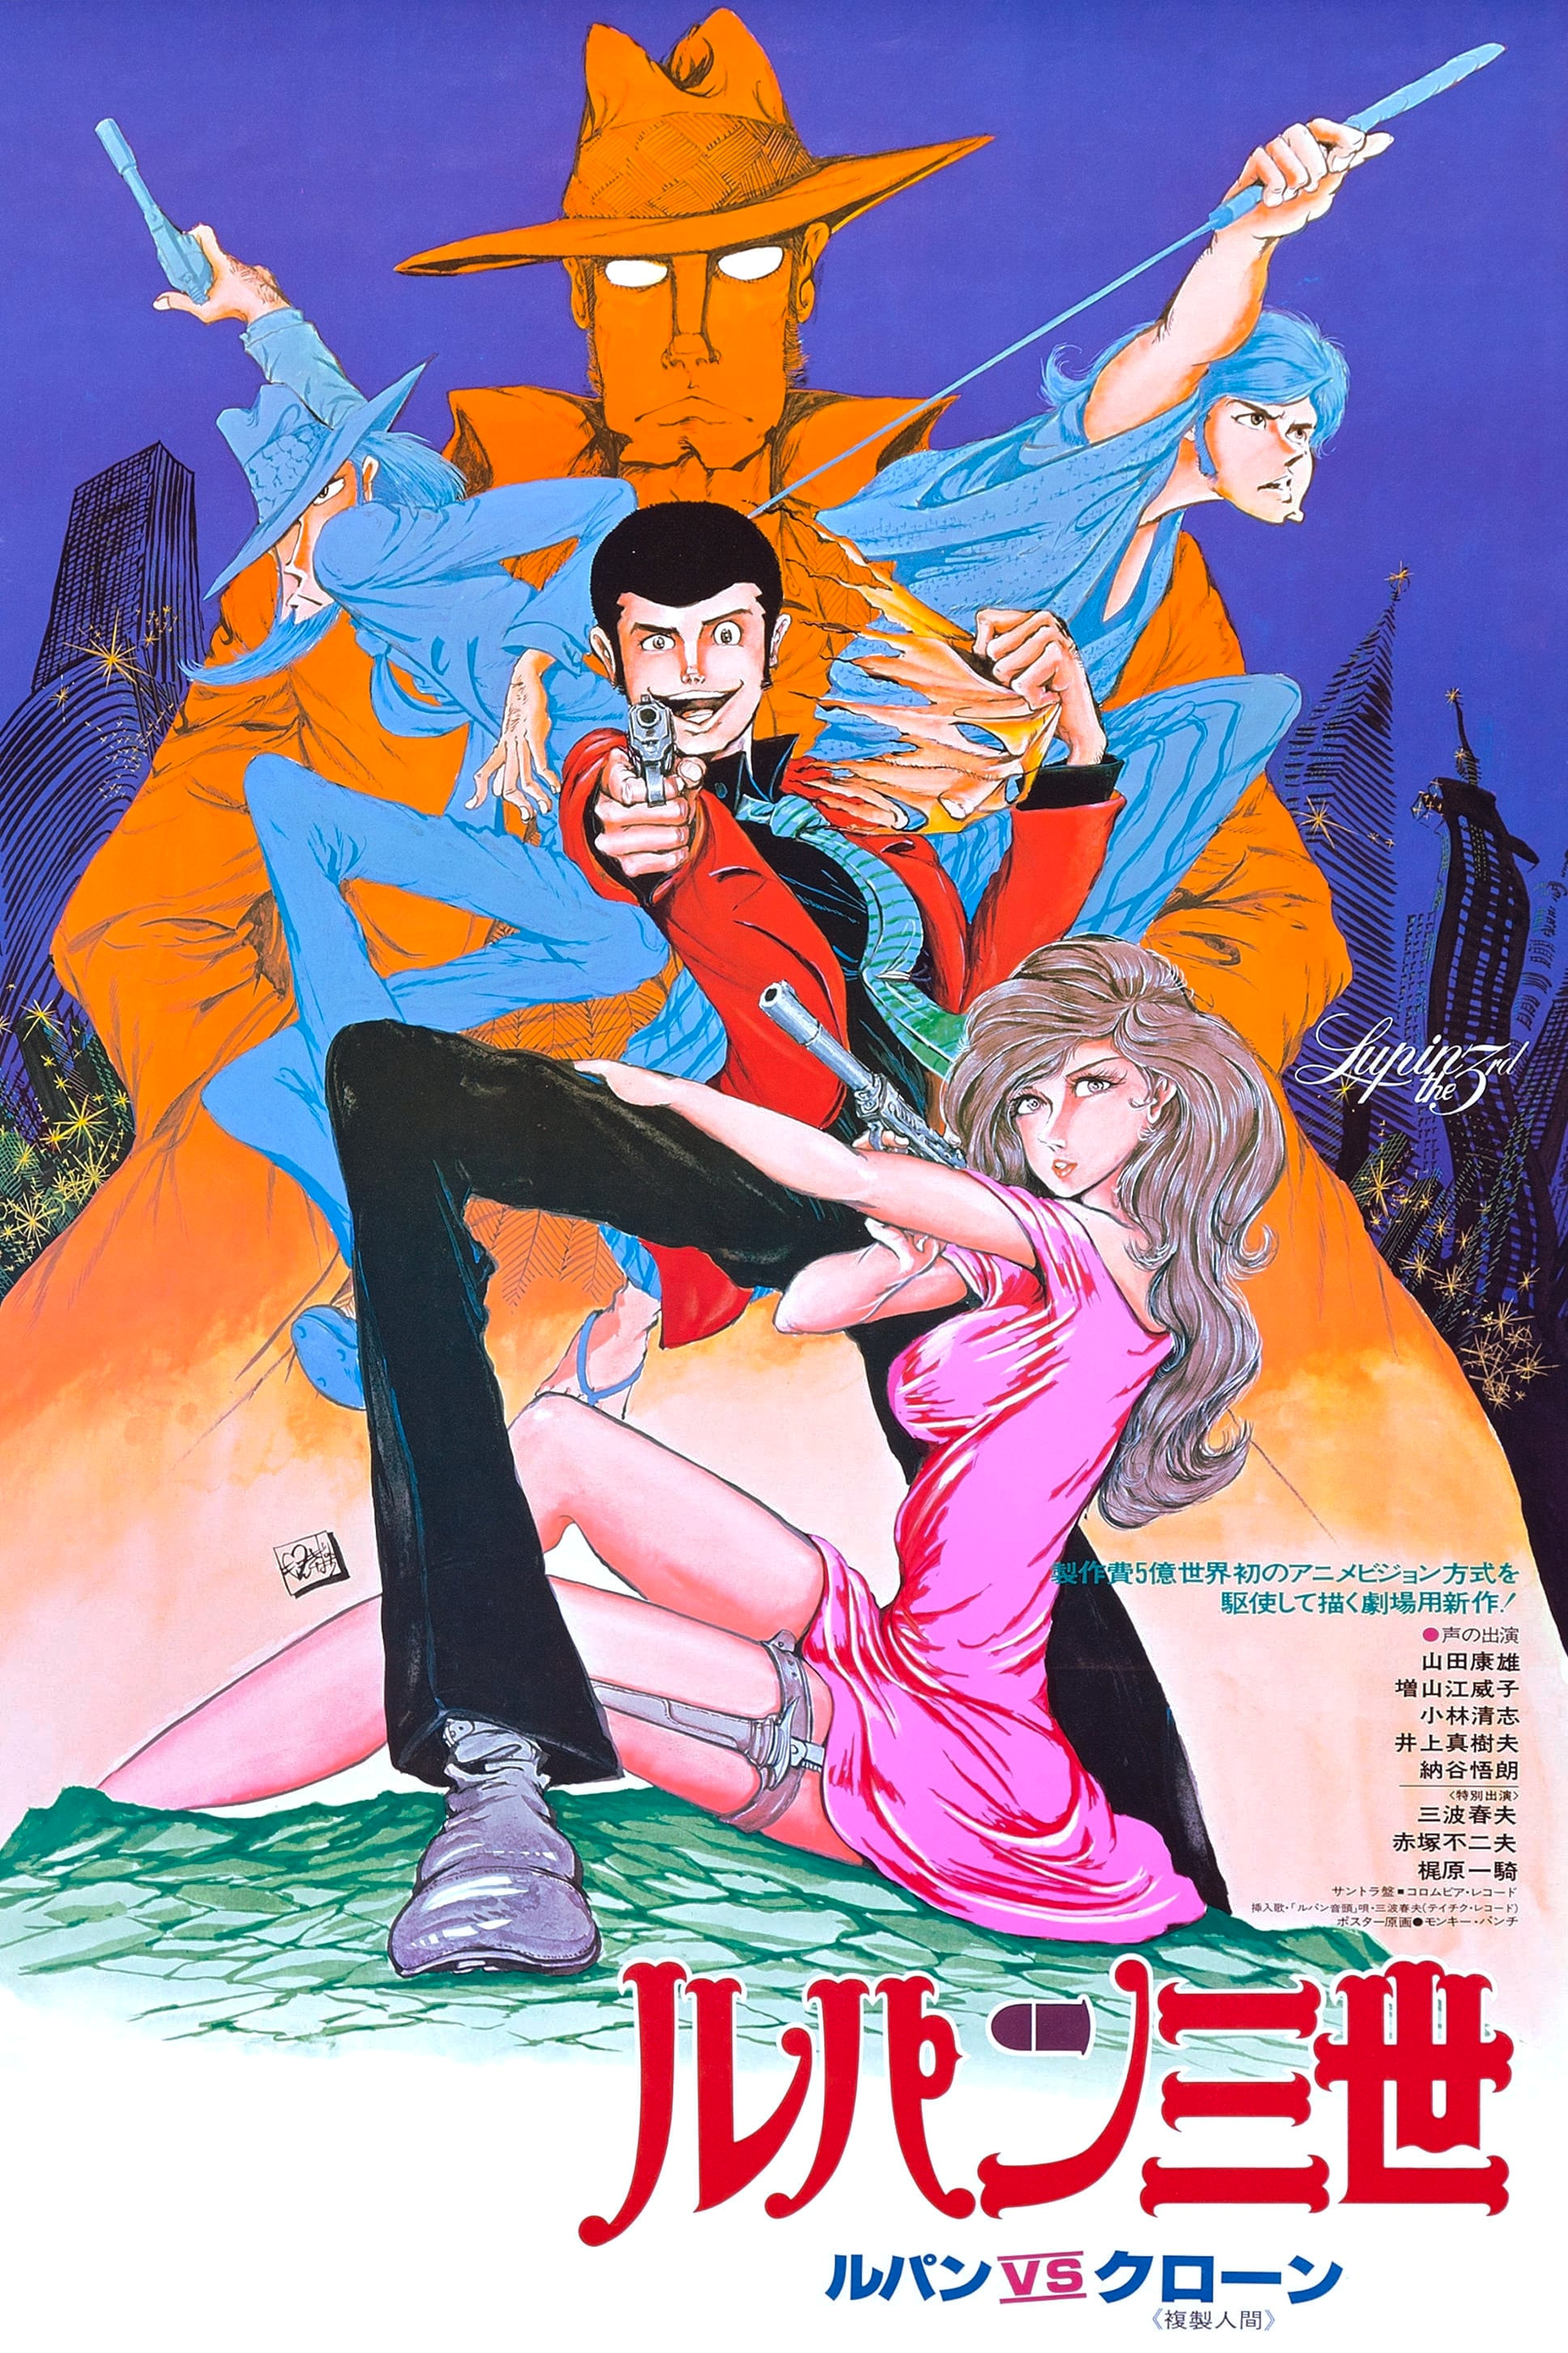 Lupin III vs. Netflix's Lupin: Is the Live-Action Worth Watching?